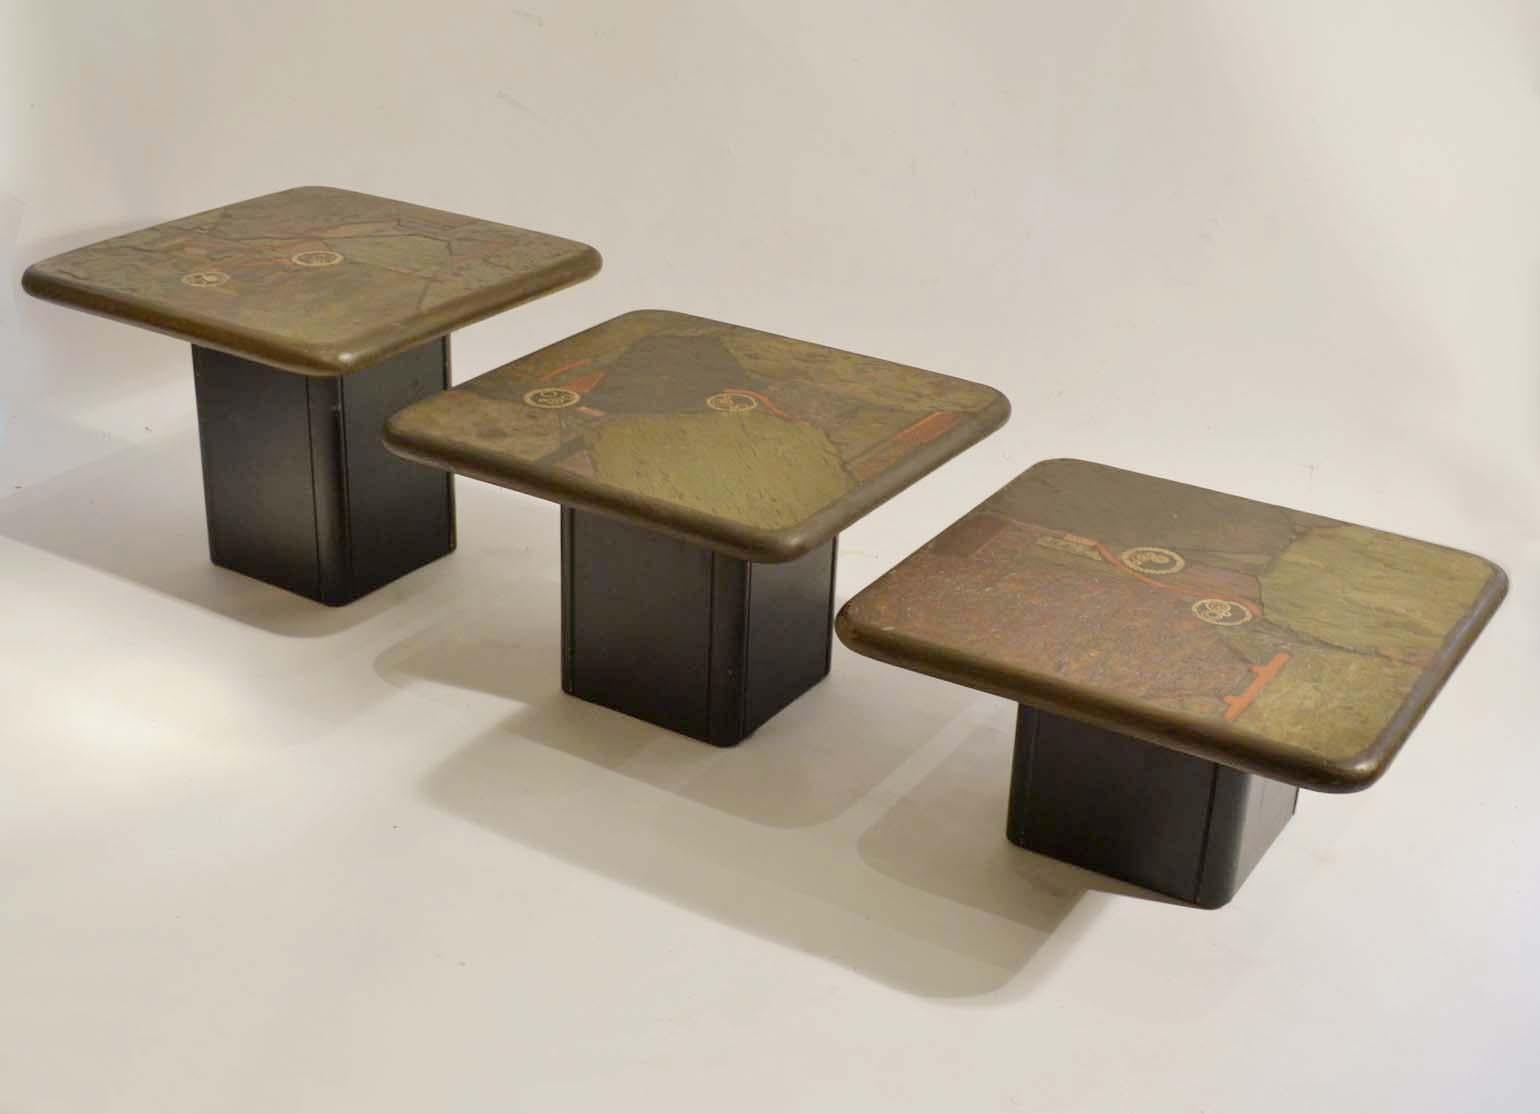 Set of three nesting natural stone mosaic side tables on alternating heights. The tables are inlaid with unpolished textural stone in earth colors and pieces of brass and copper. These extraordinary are square 60 x 60 cm tables with rounded corners